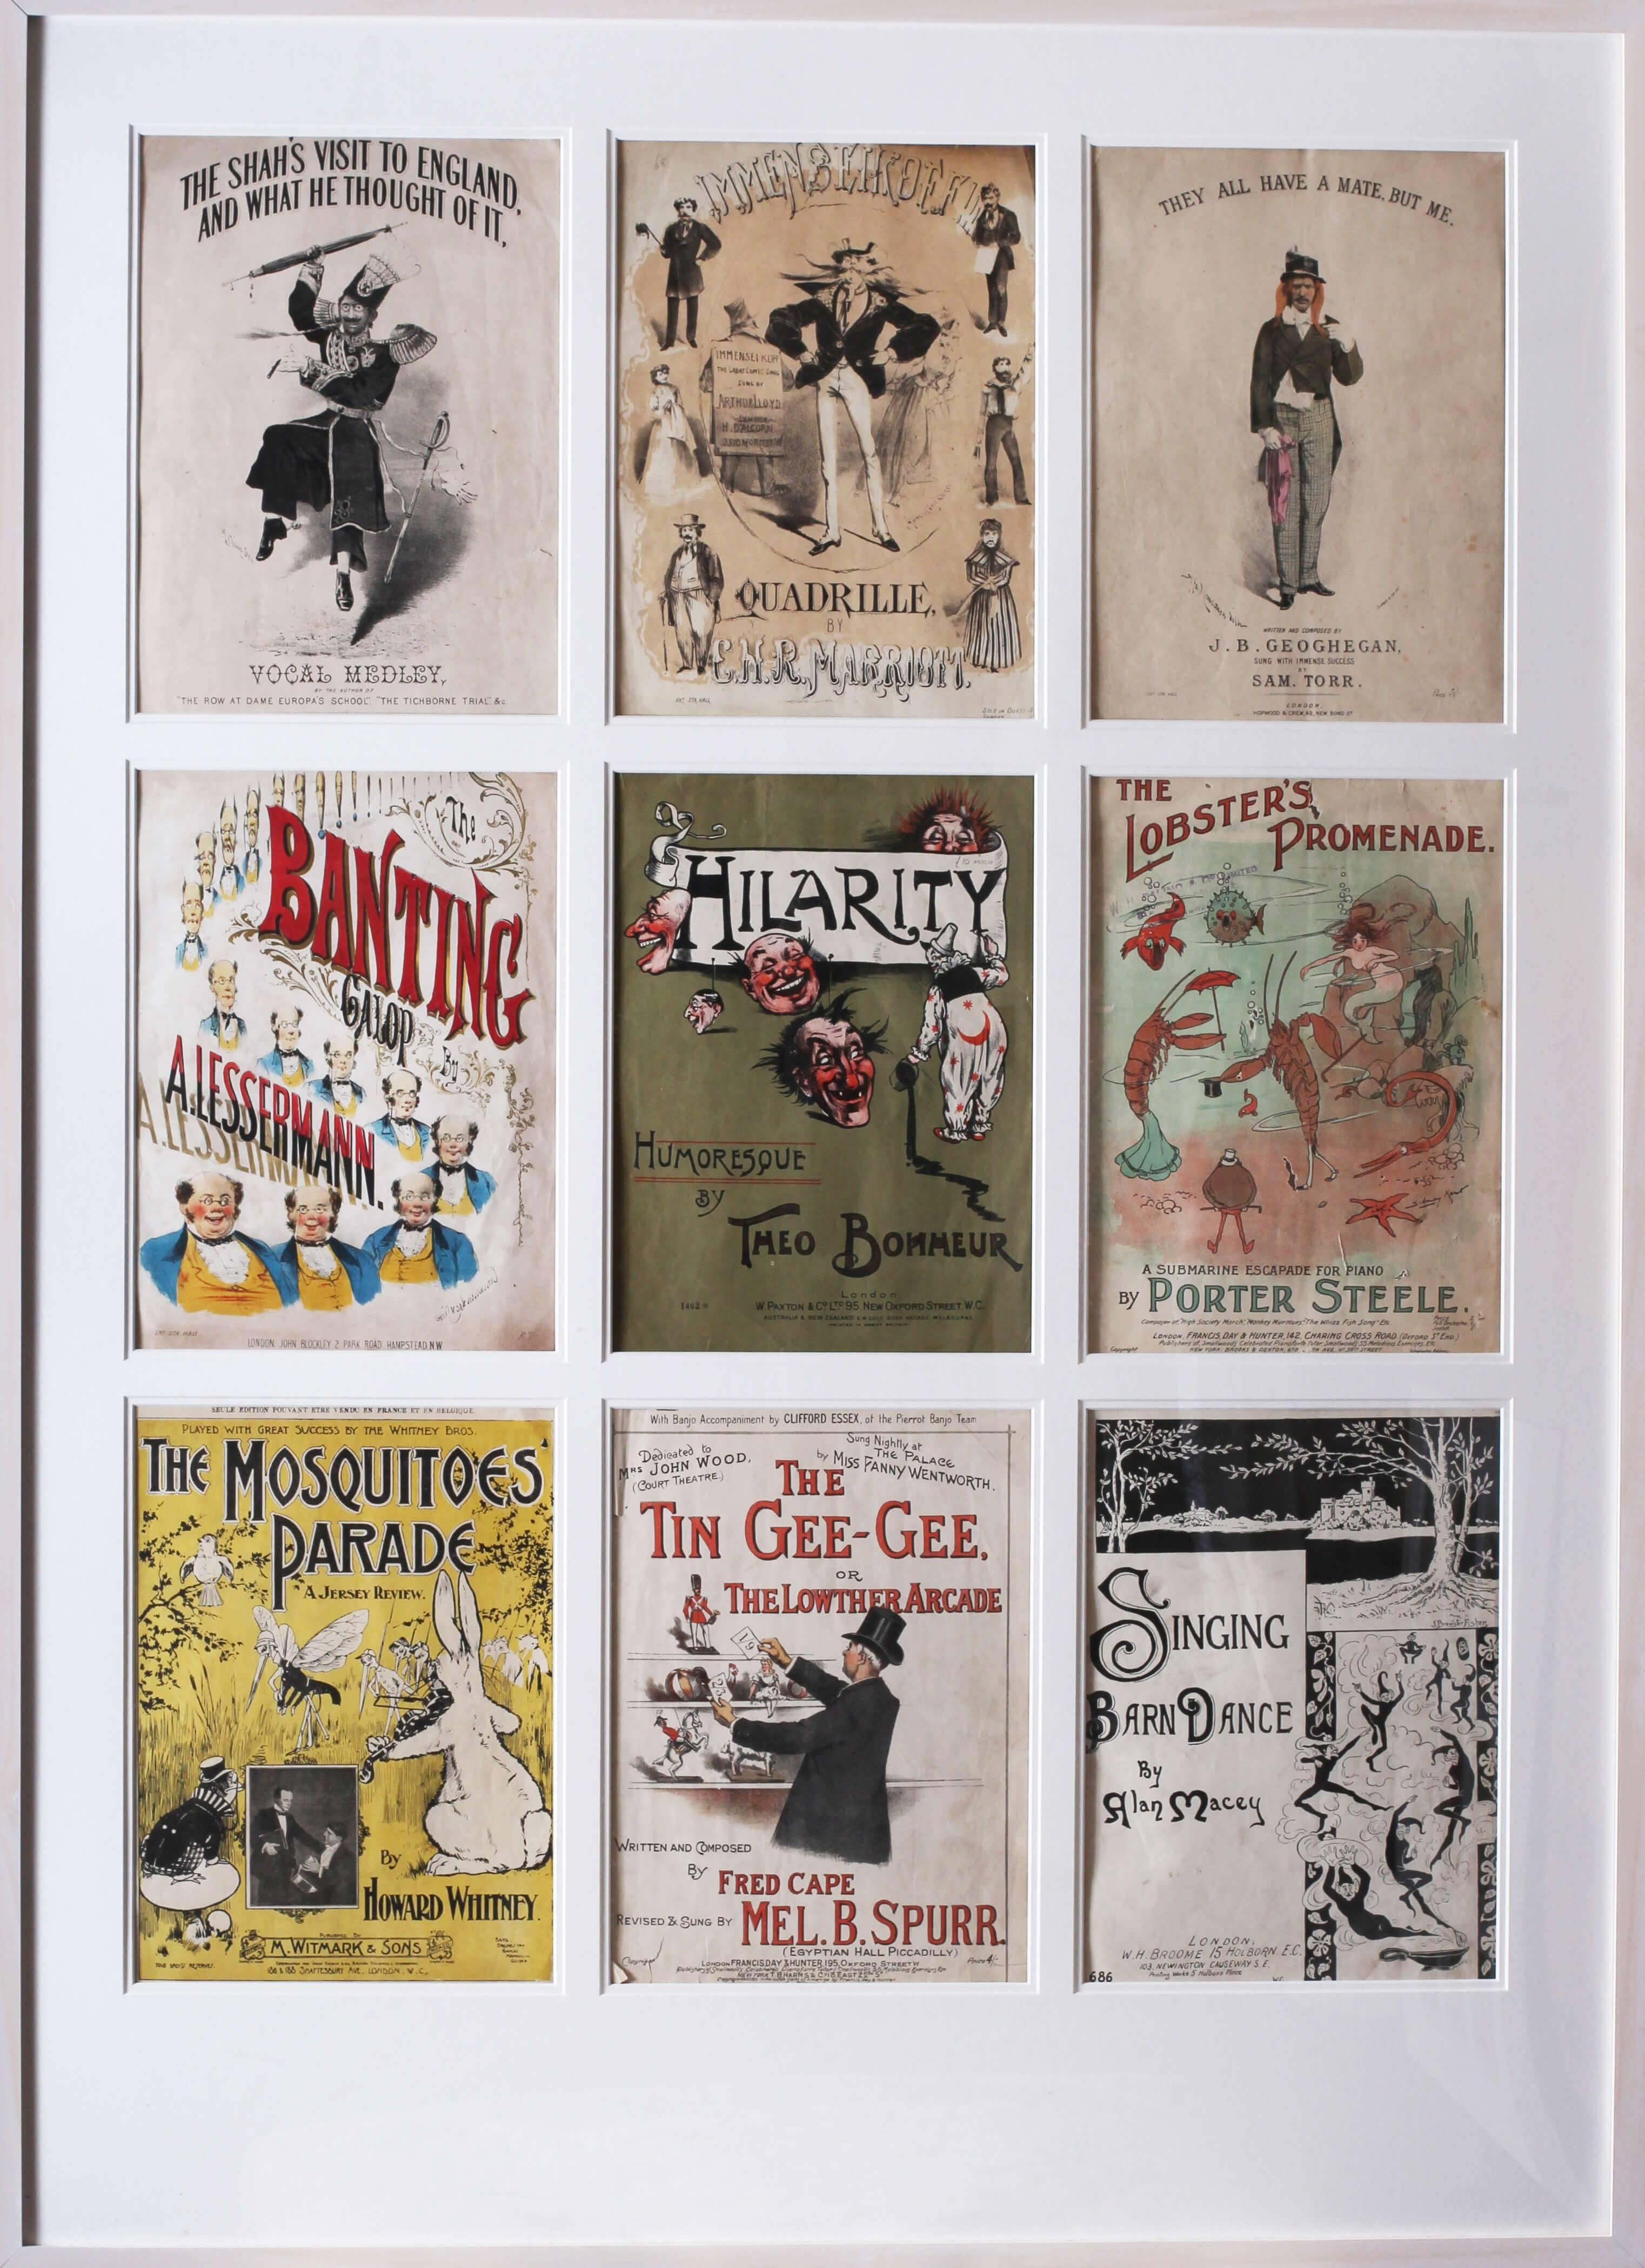 Original British sheet music covers from the early 19th Century - Print by Unknown